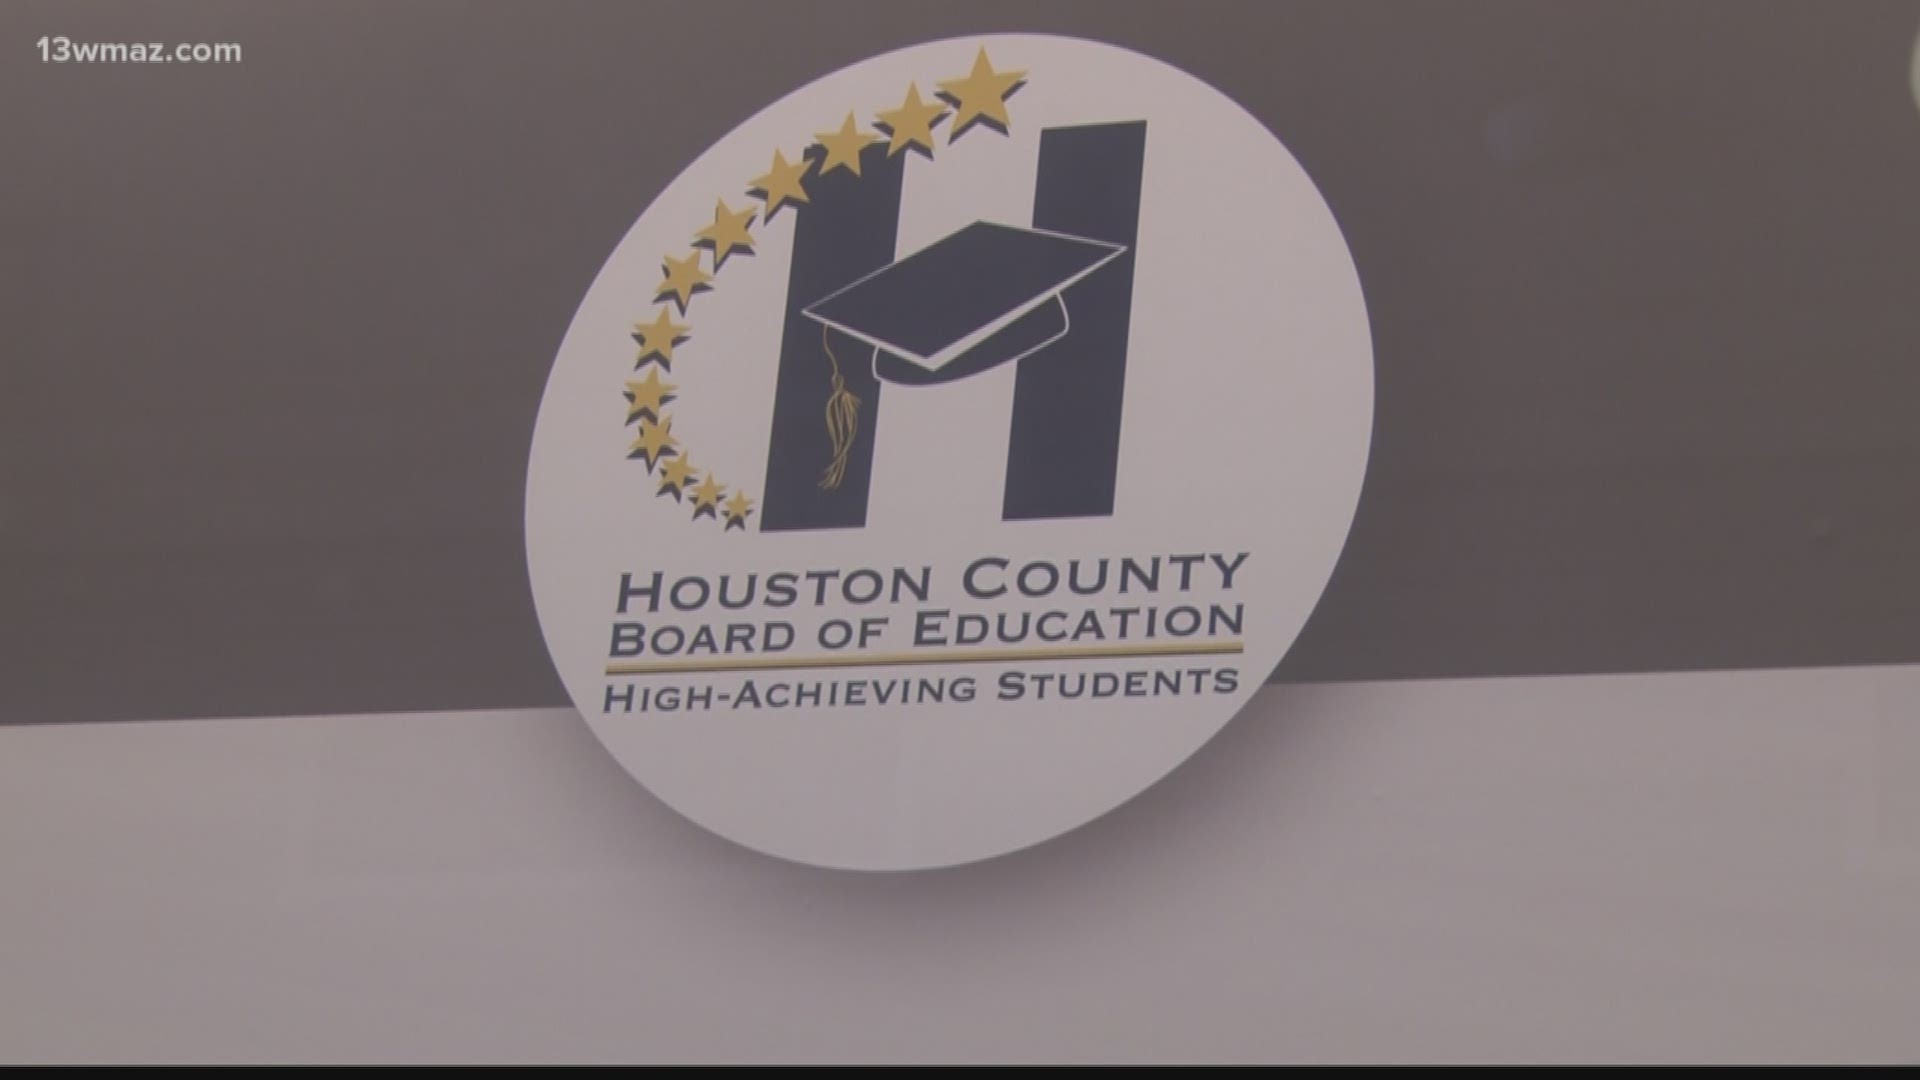 The Houston County School System enrolled 29,770 students in during the 2018-2019 school year.